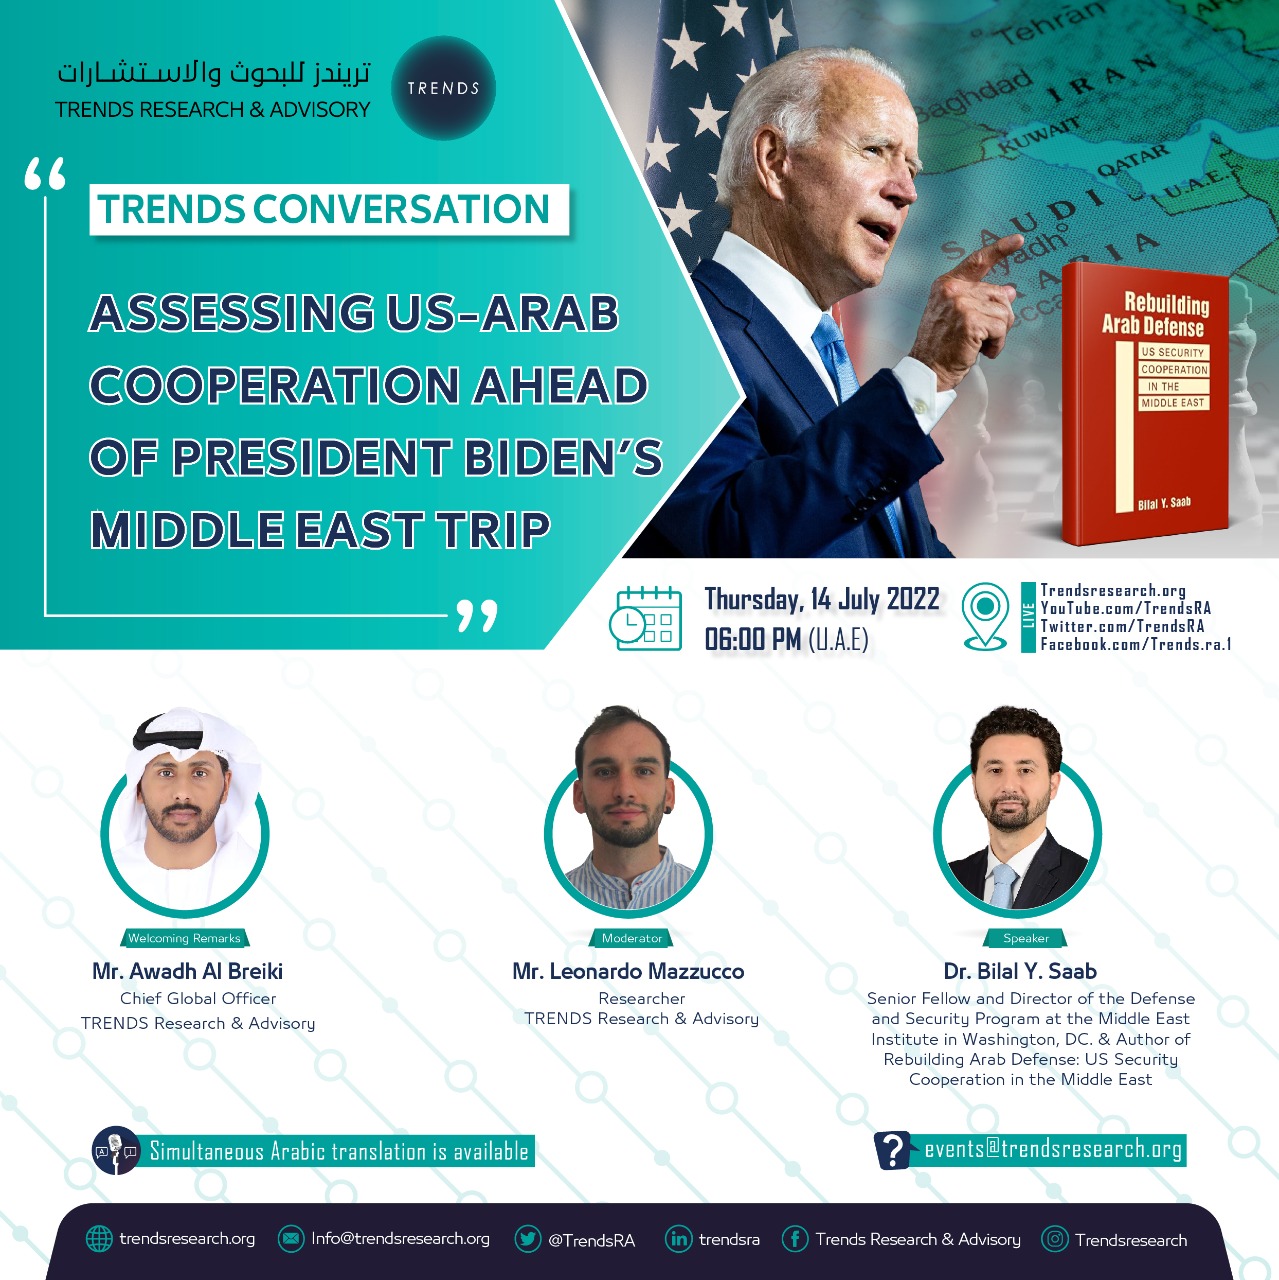 Assessing US-Arab Cooperation Ahead of President Biden’s Middle East Trip